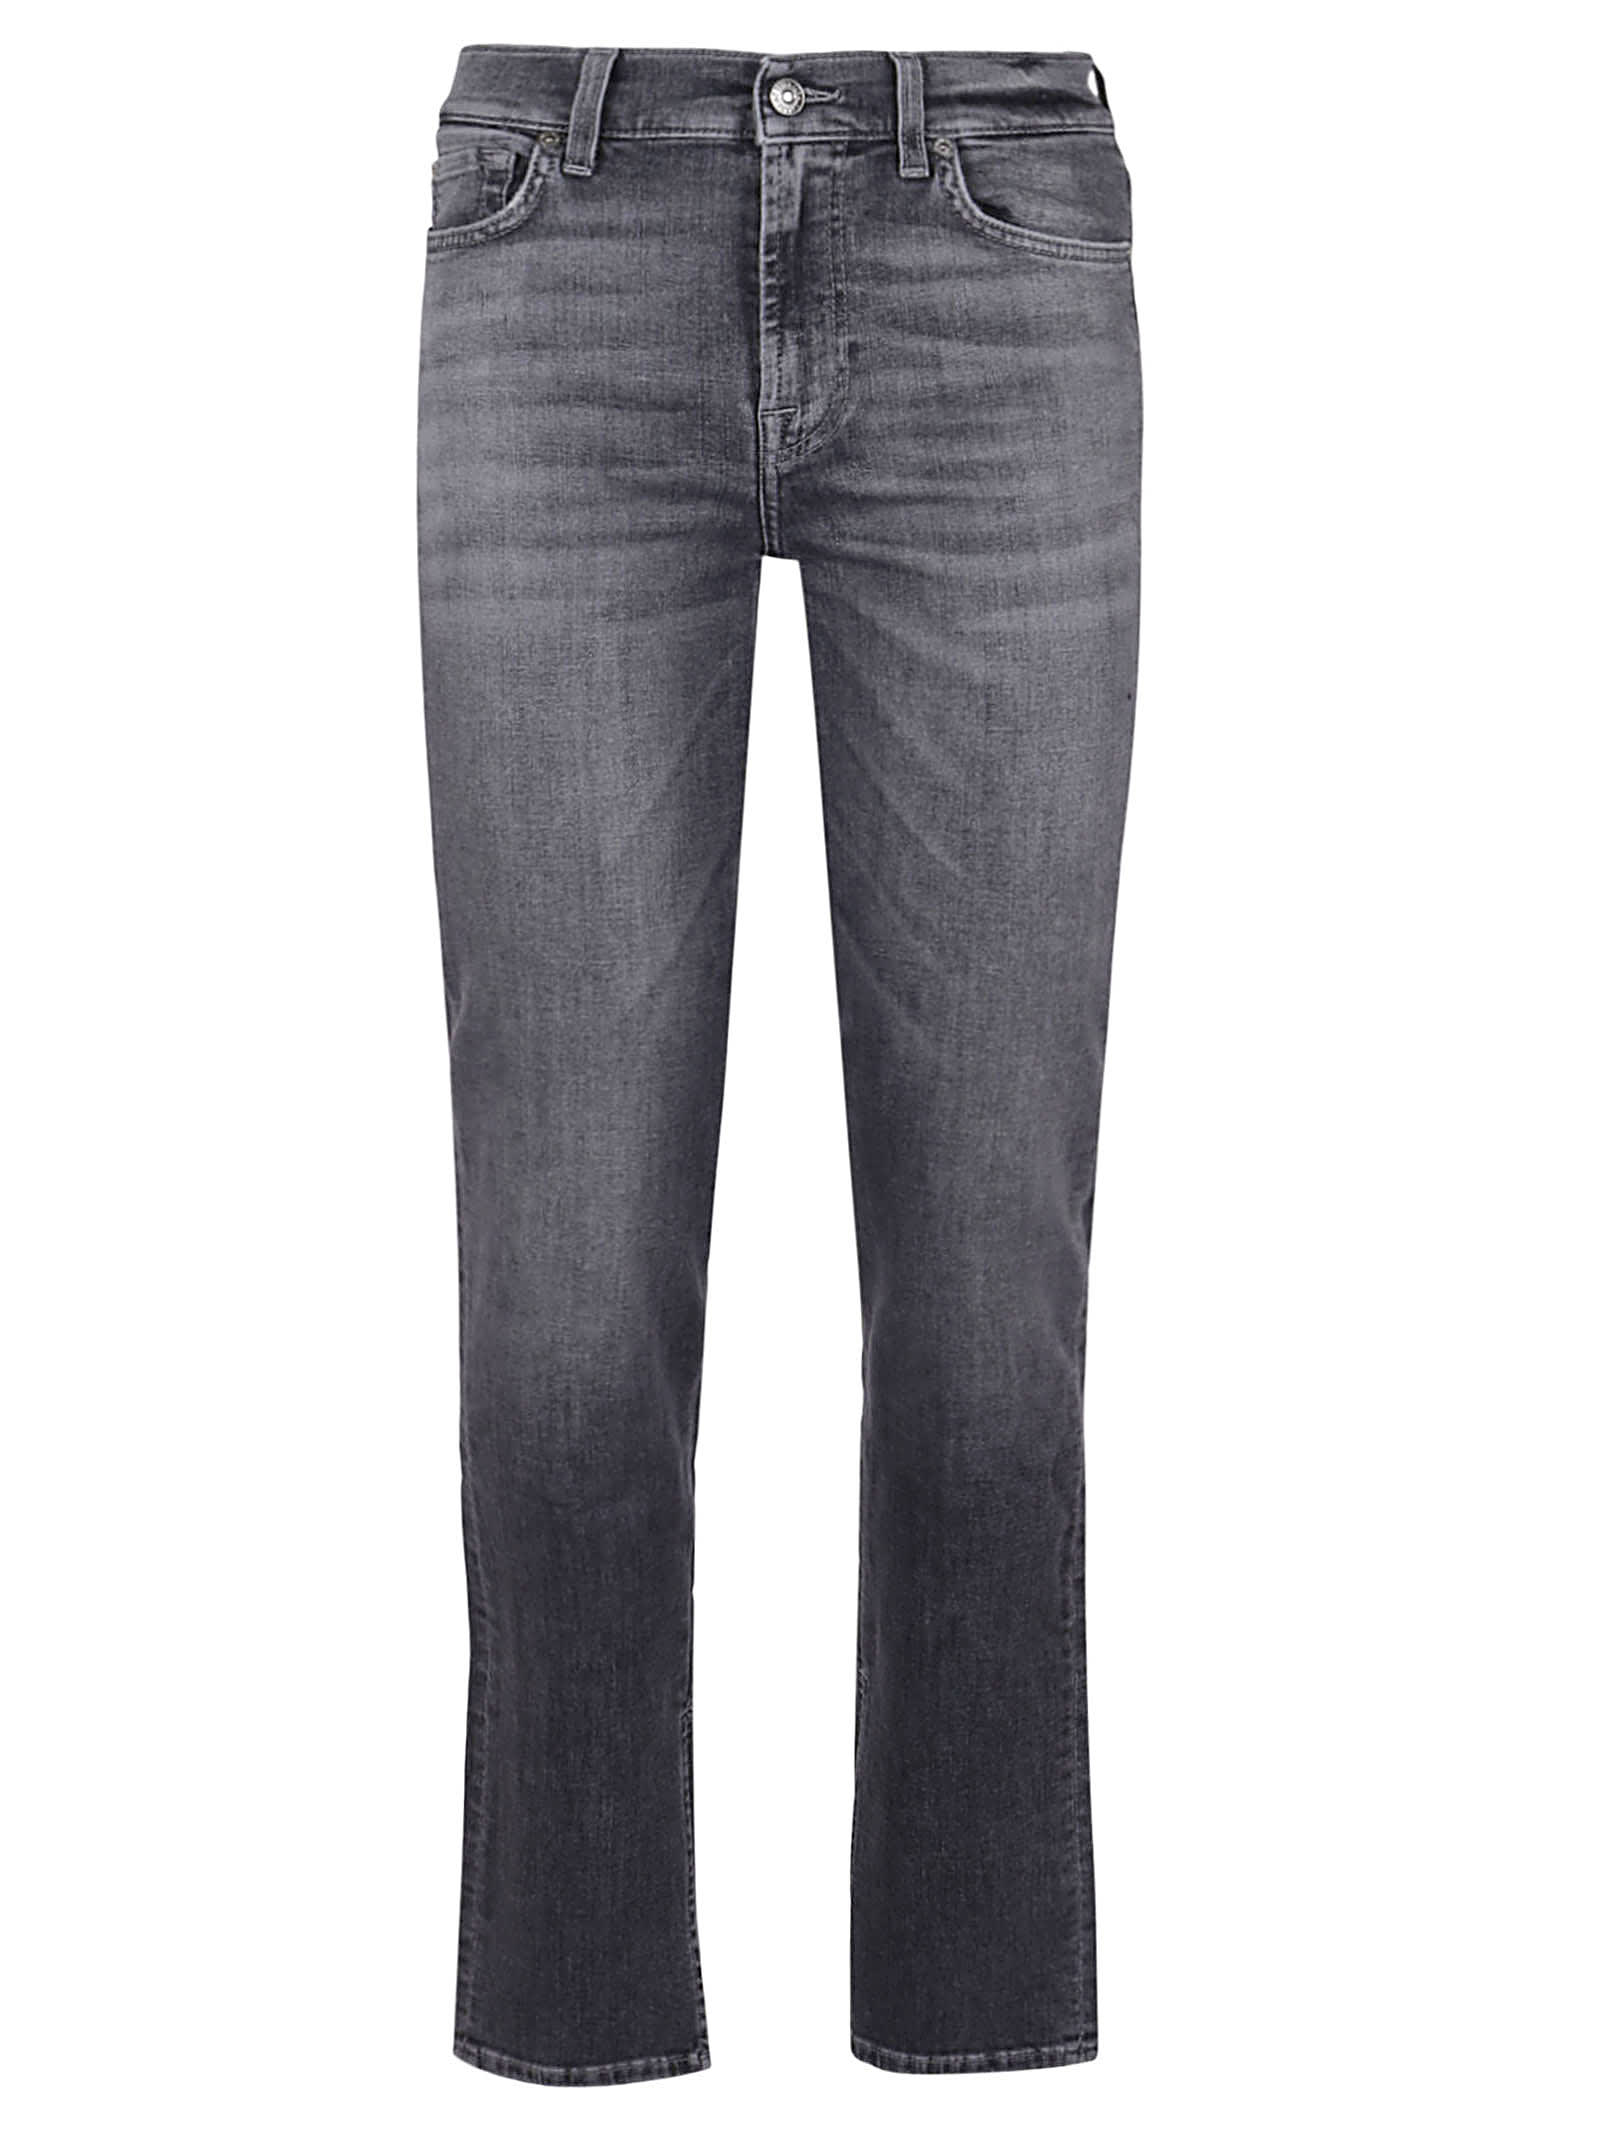 7 For All Mankind The Straight Soho Grey